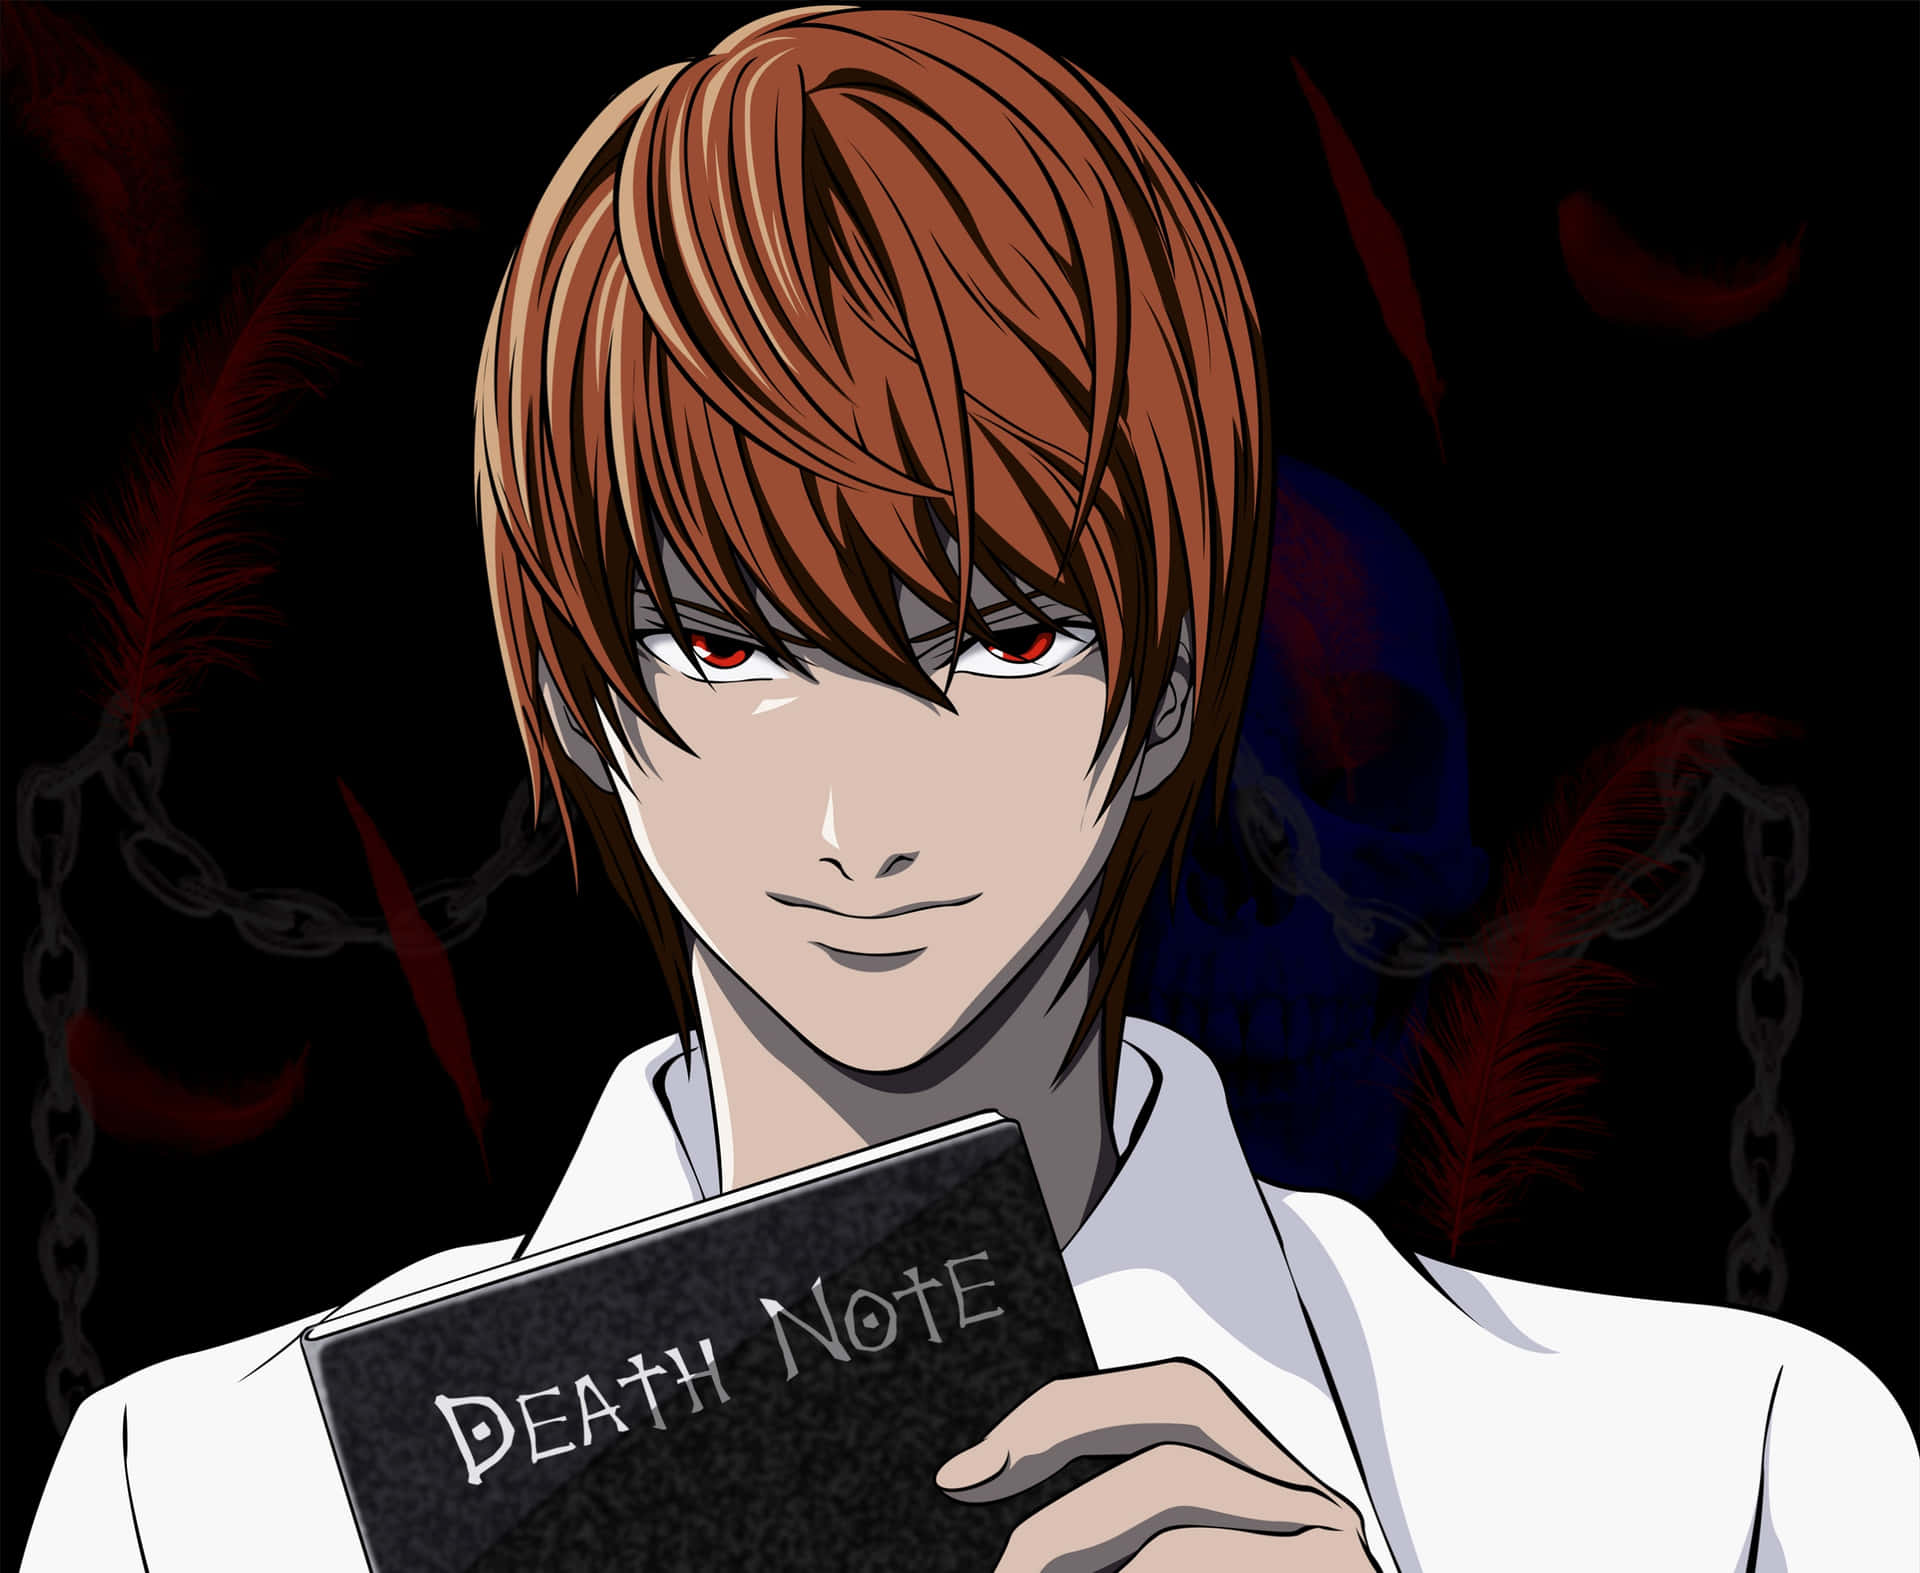 Light Yagami, the main protagonist of Death Note